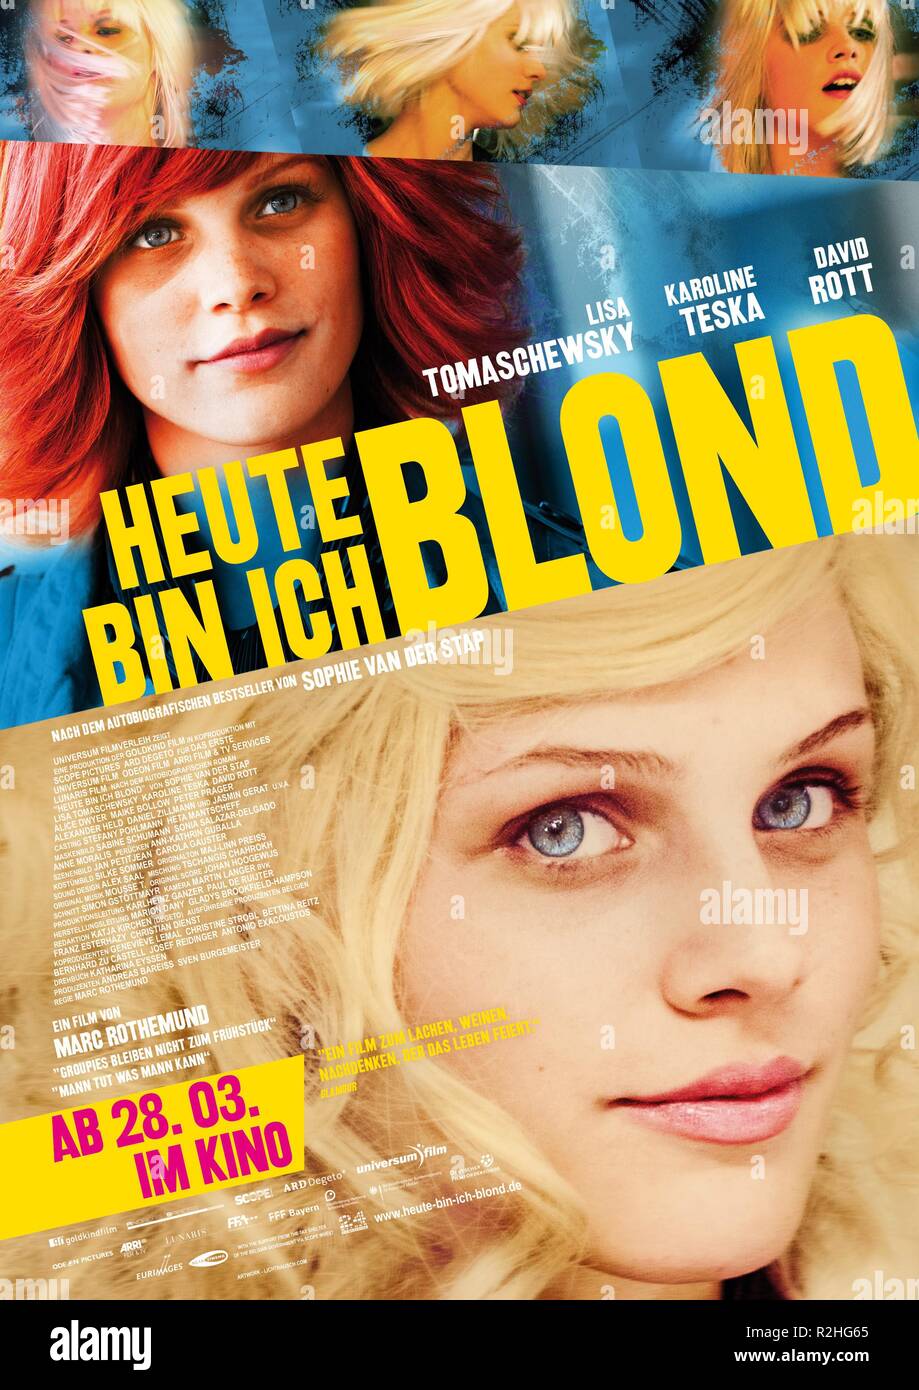 Heute Bin Ich Blond High Resolution Stock Photography and Images - Alamy